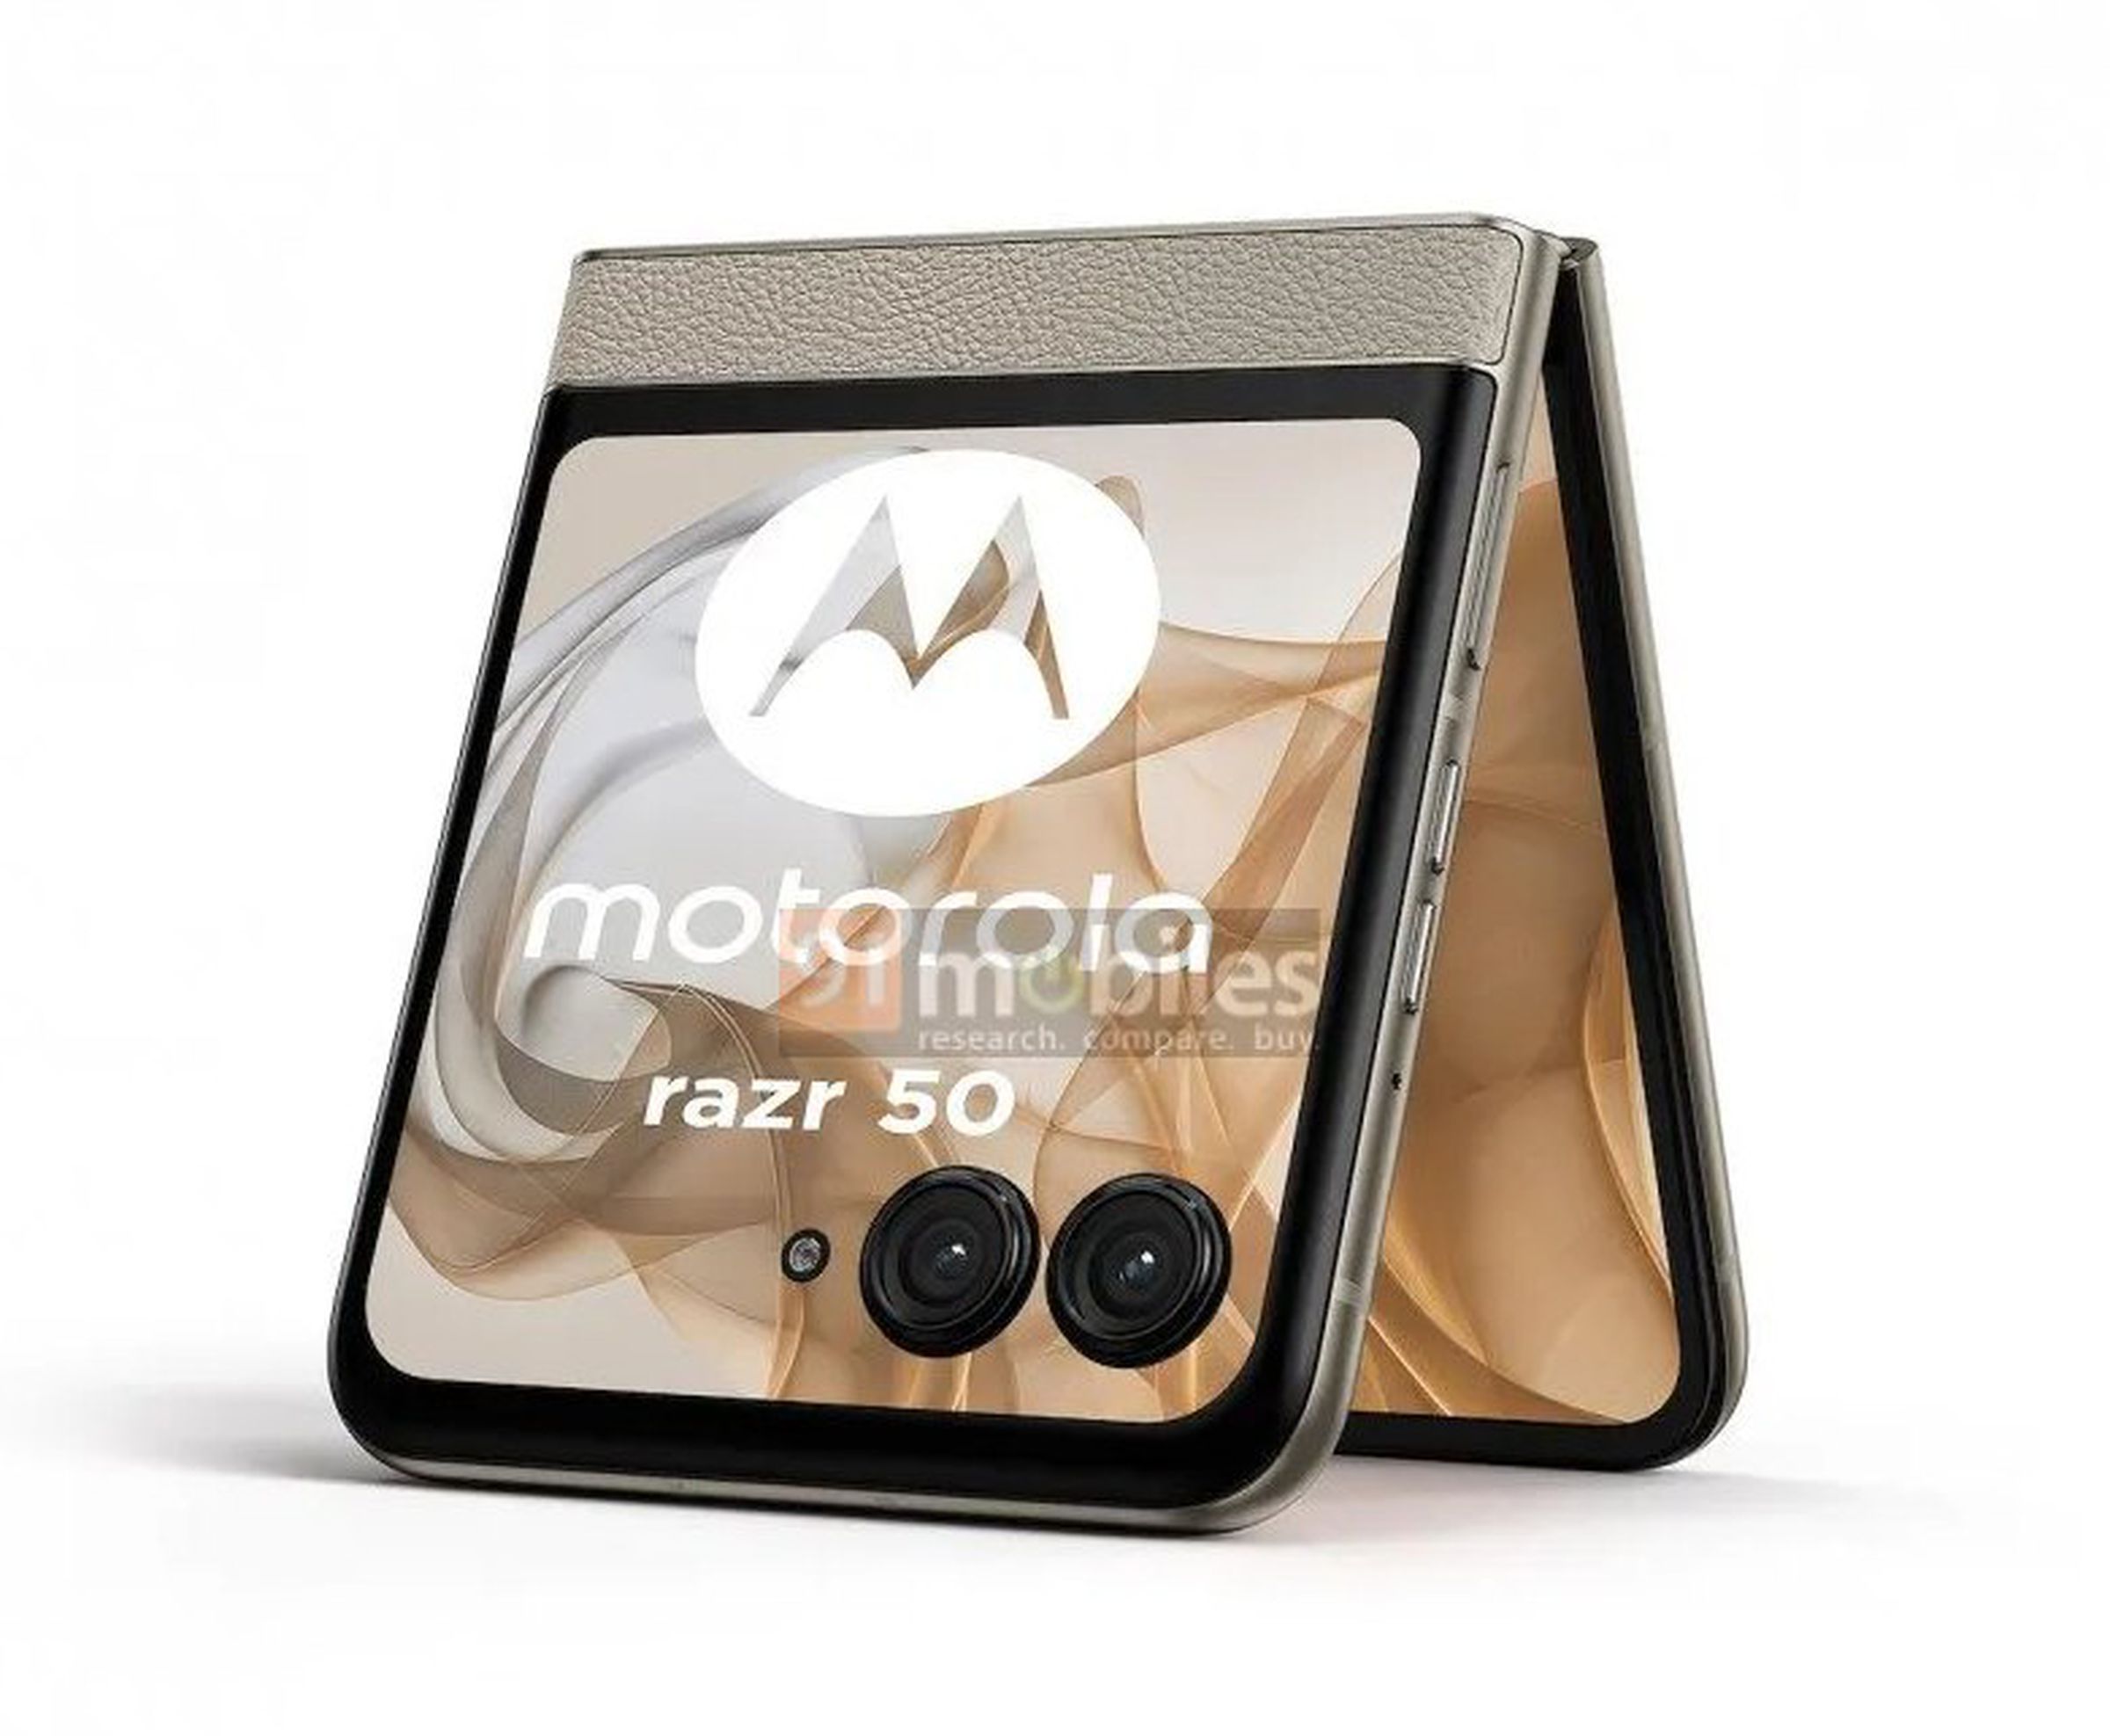 Rendered image of a Motorola Razr 50 5G in “tent mode” showing its external screen.